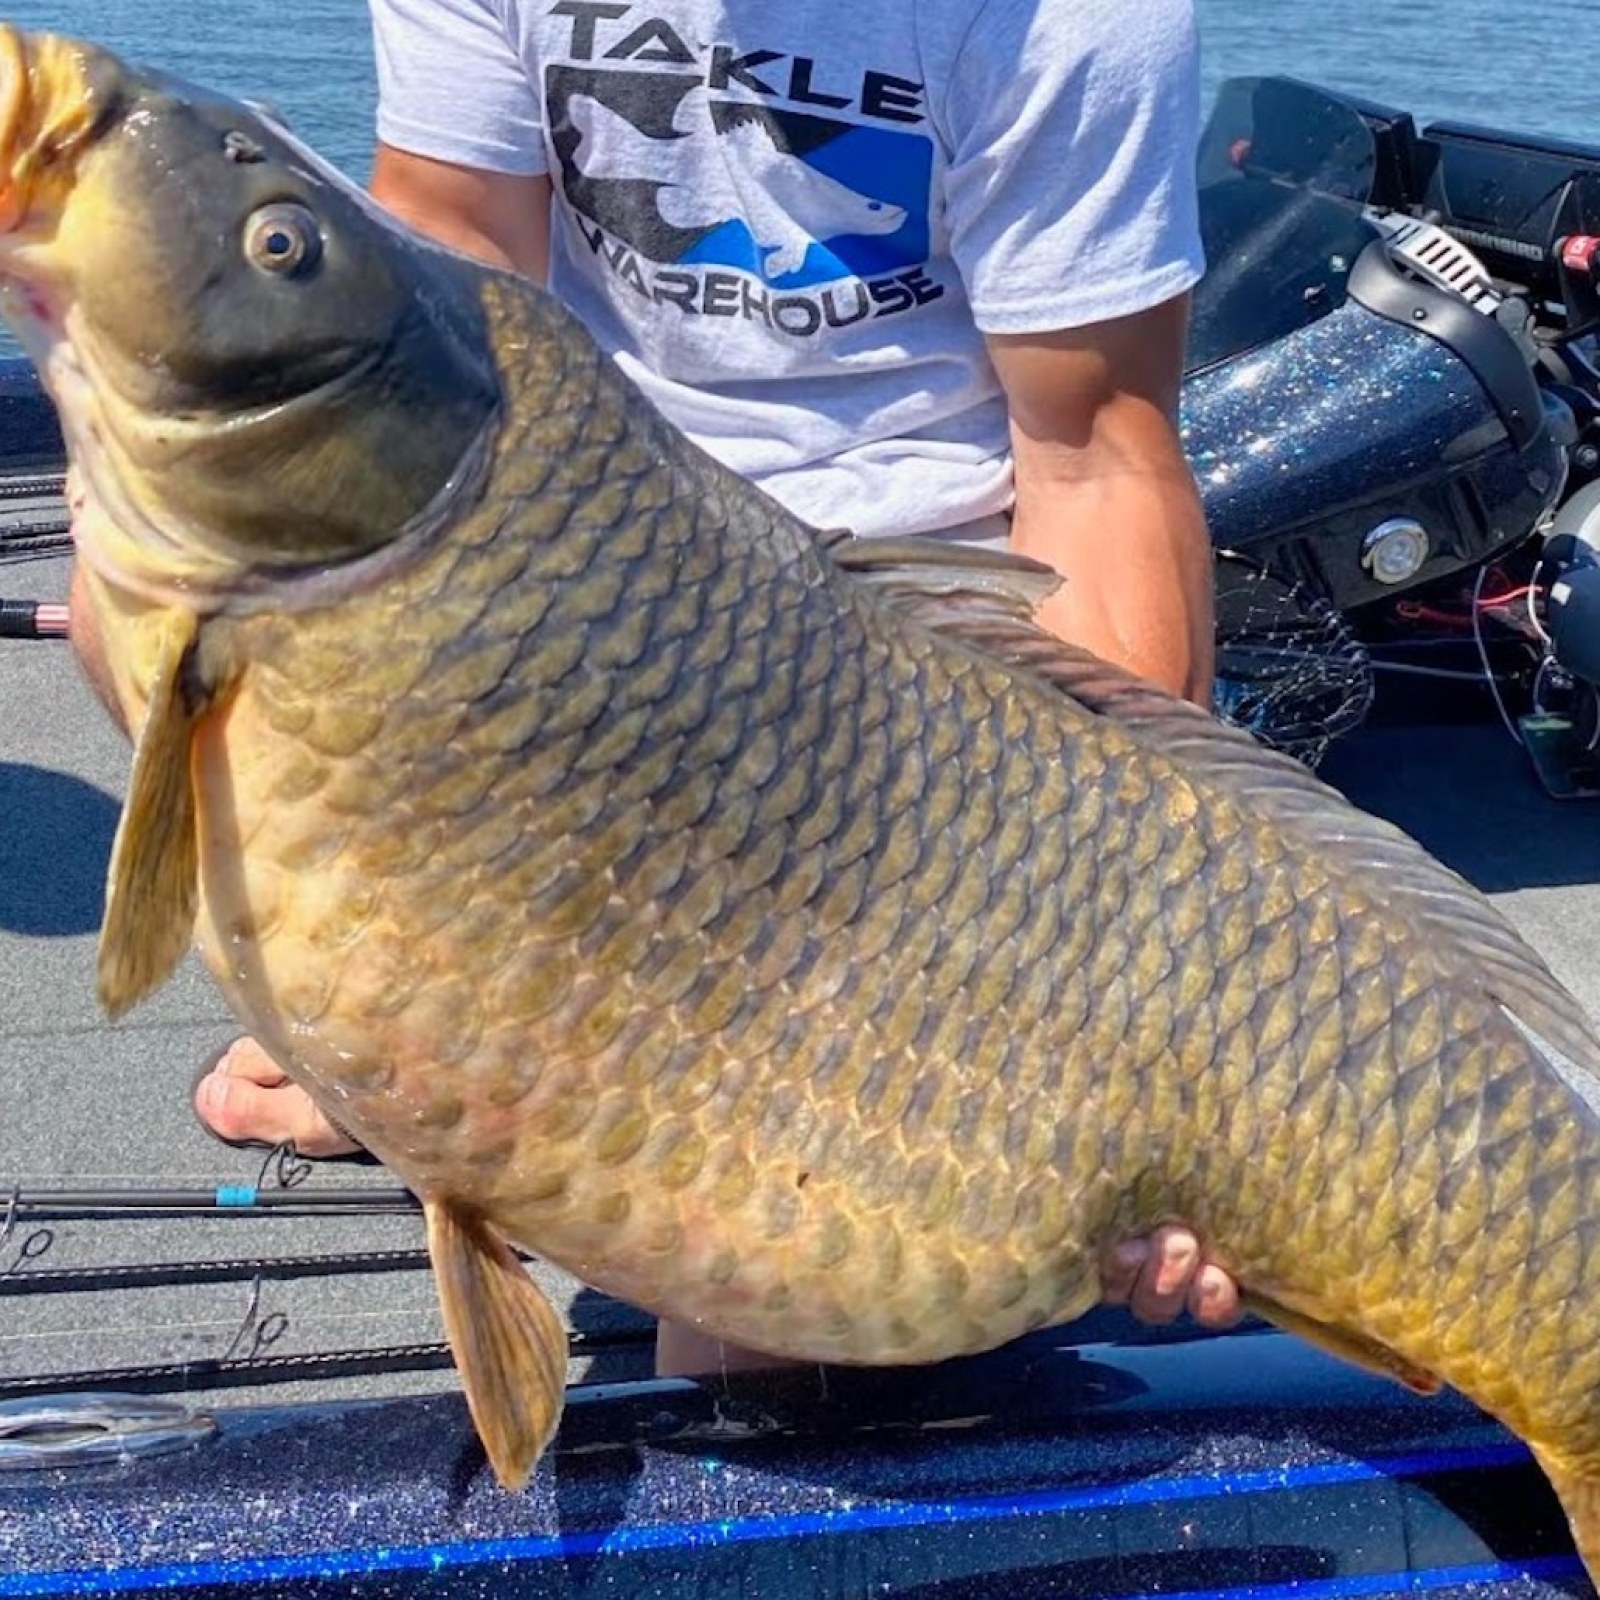 Never Seen One This Big Ever': Huge Carp Breaks 44-Year